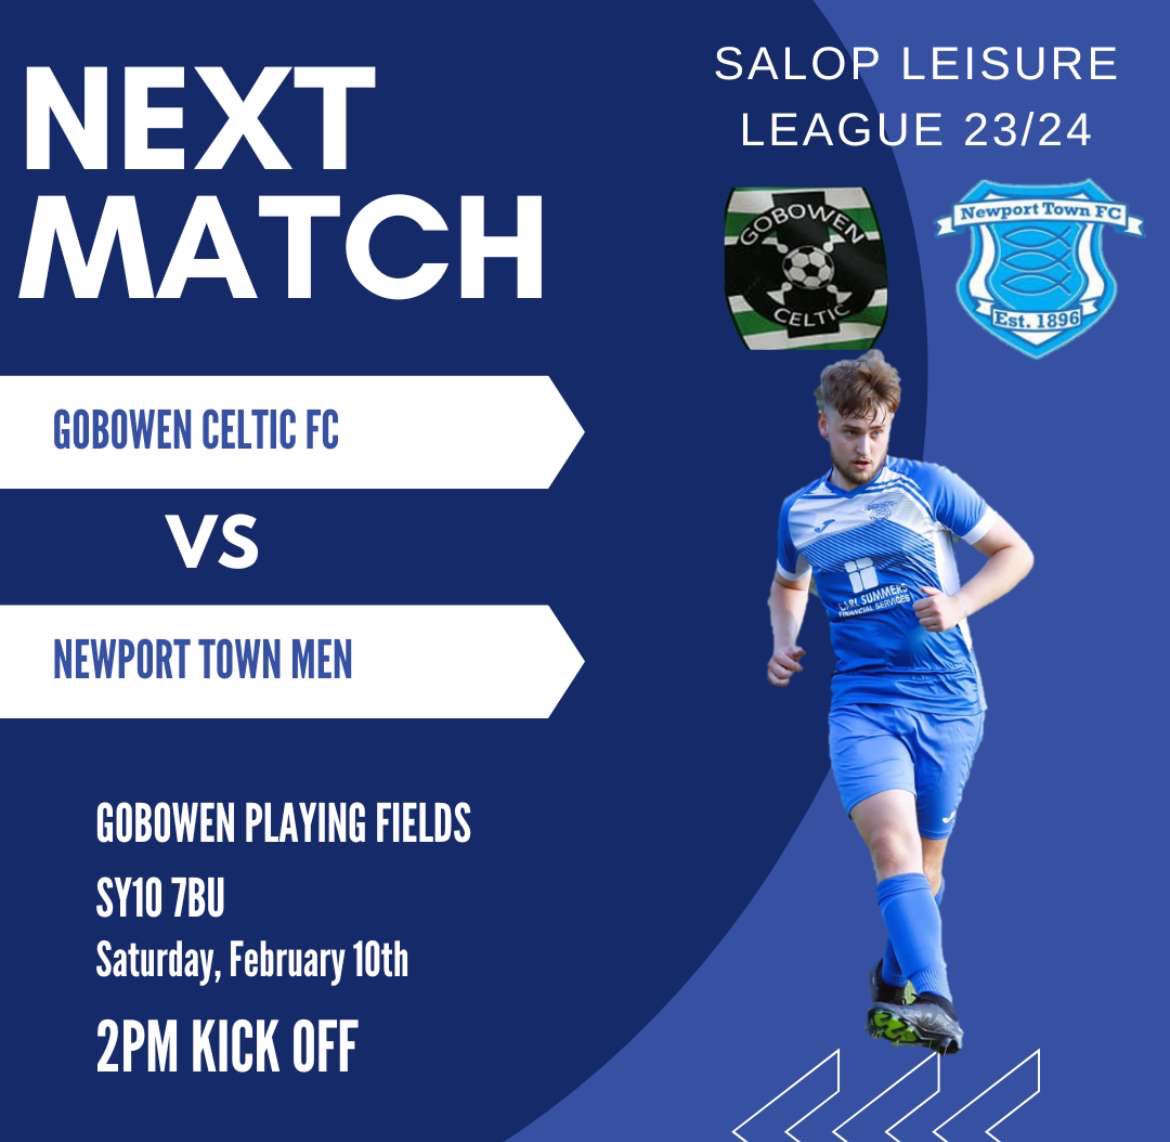 Following a pitch inspection, our men’s game is ON this afternoon vs @GobowenCelticFC . The lads will be looking for back to back victories, following last weeks win! Come down and get behind the lads 🐟💙 #UpTheTown #threefishes